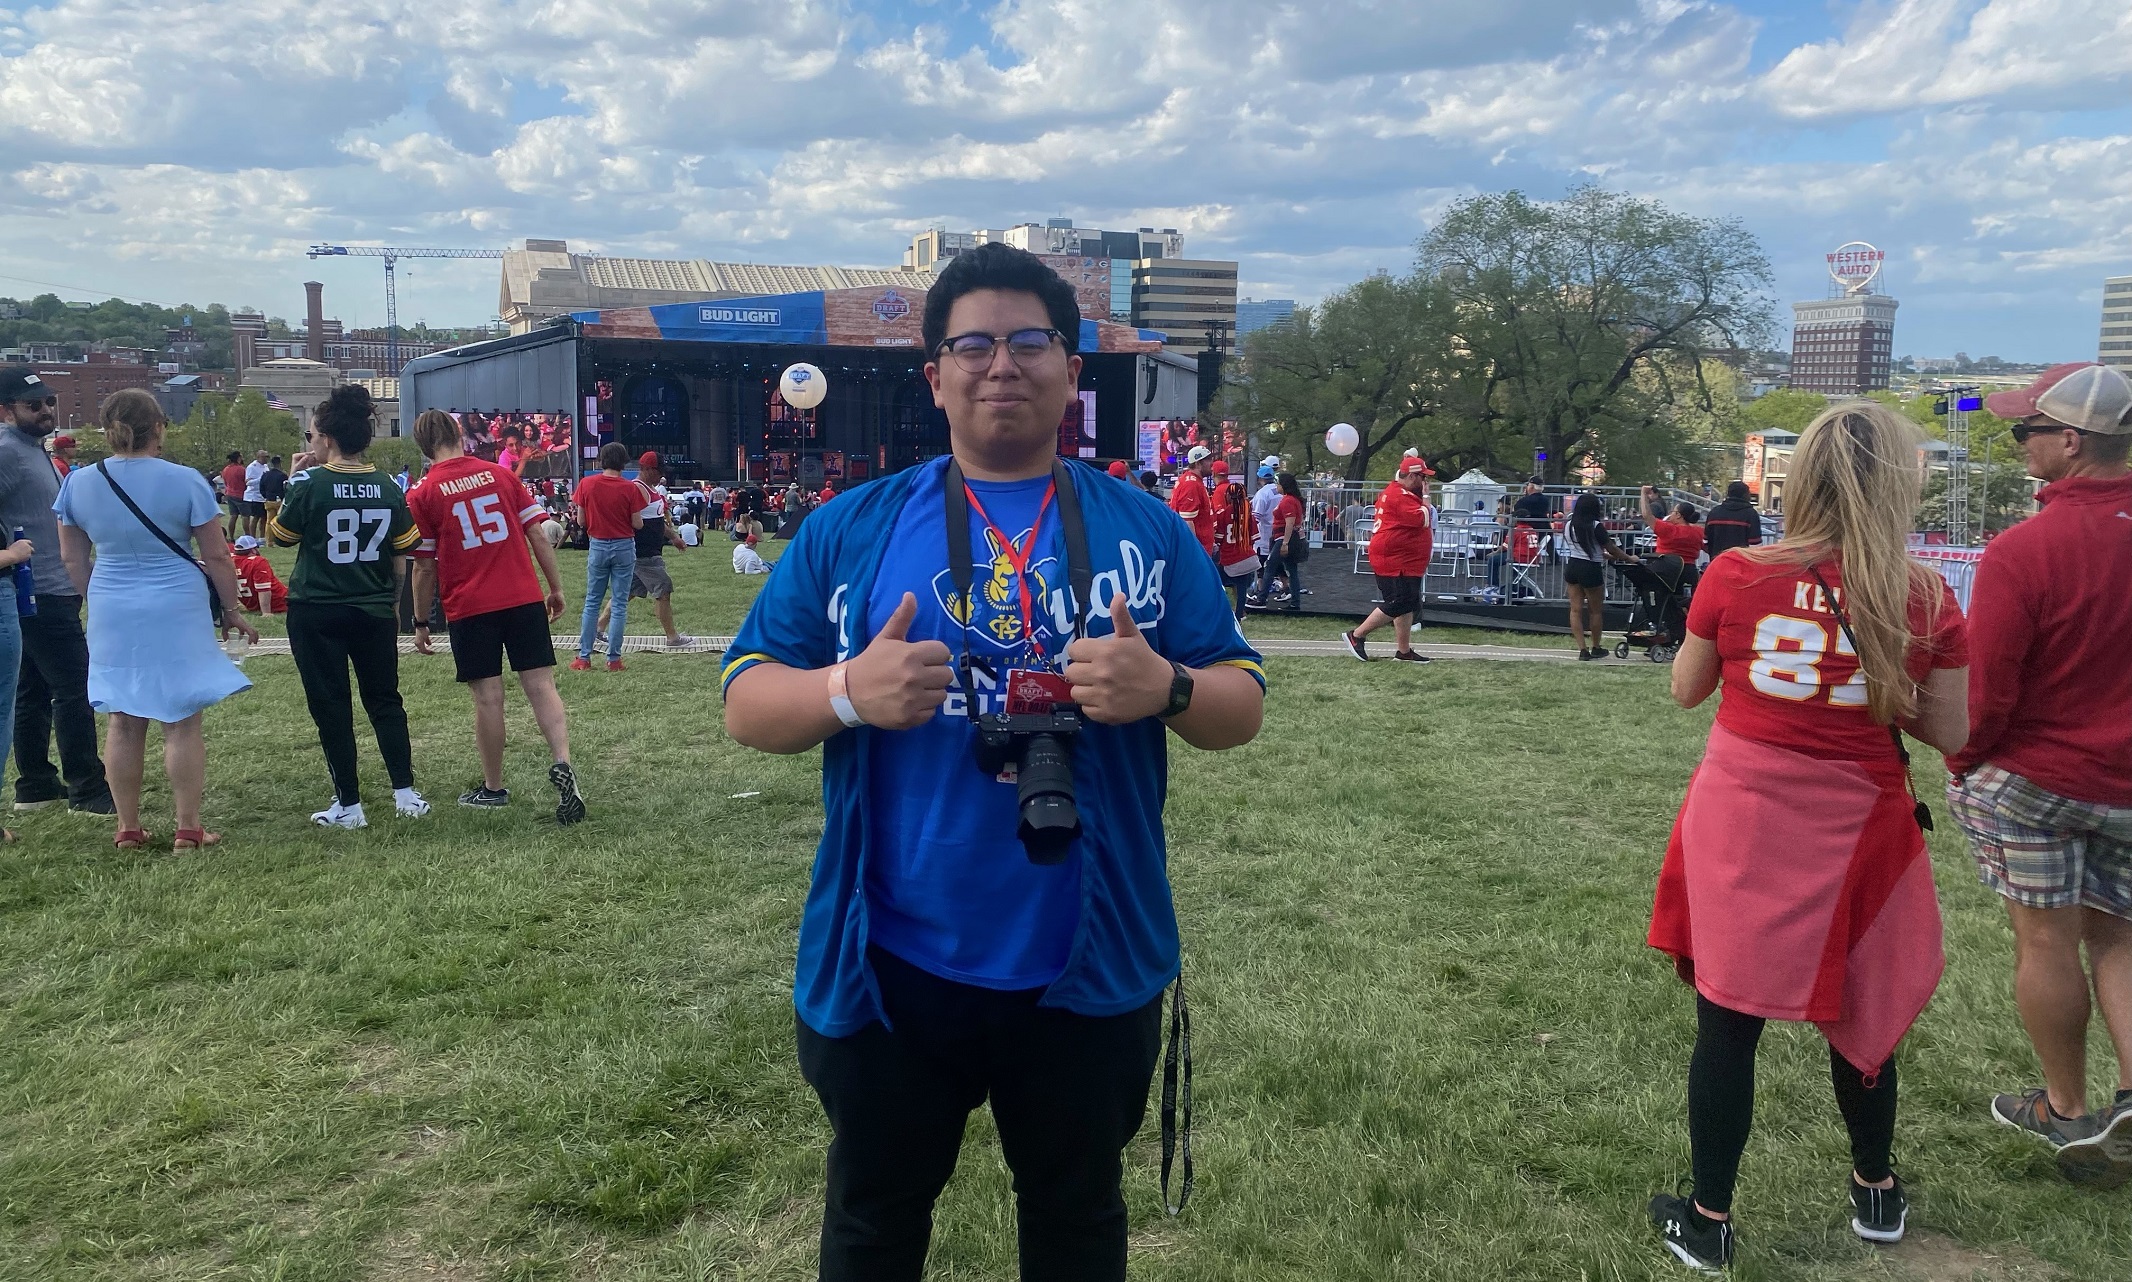 Cristian Martinez stands on the lawn at an NFL Draft event. Union Station and the large stage are visible behind him and there are people all around.